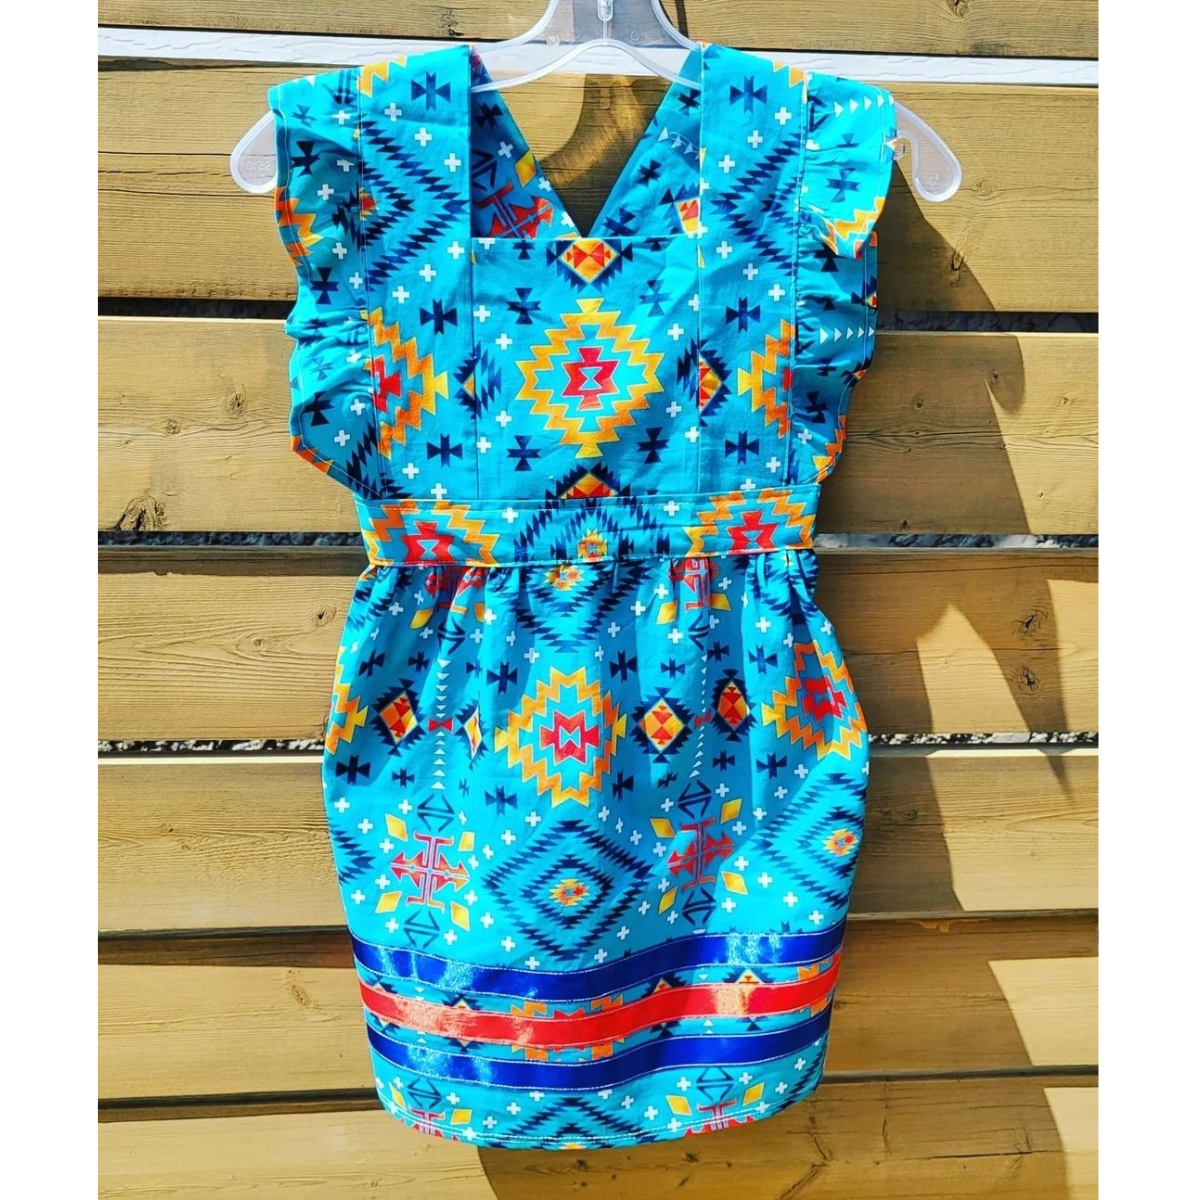 A toddler-sized patterned dress with ruffled sleeves and red and blue ribbons along the bottom.